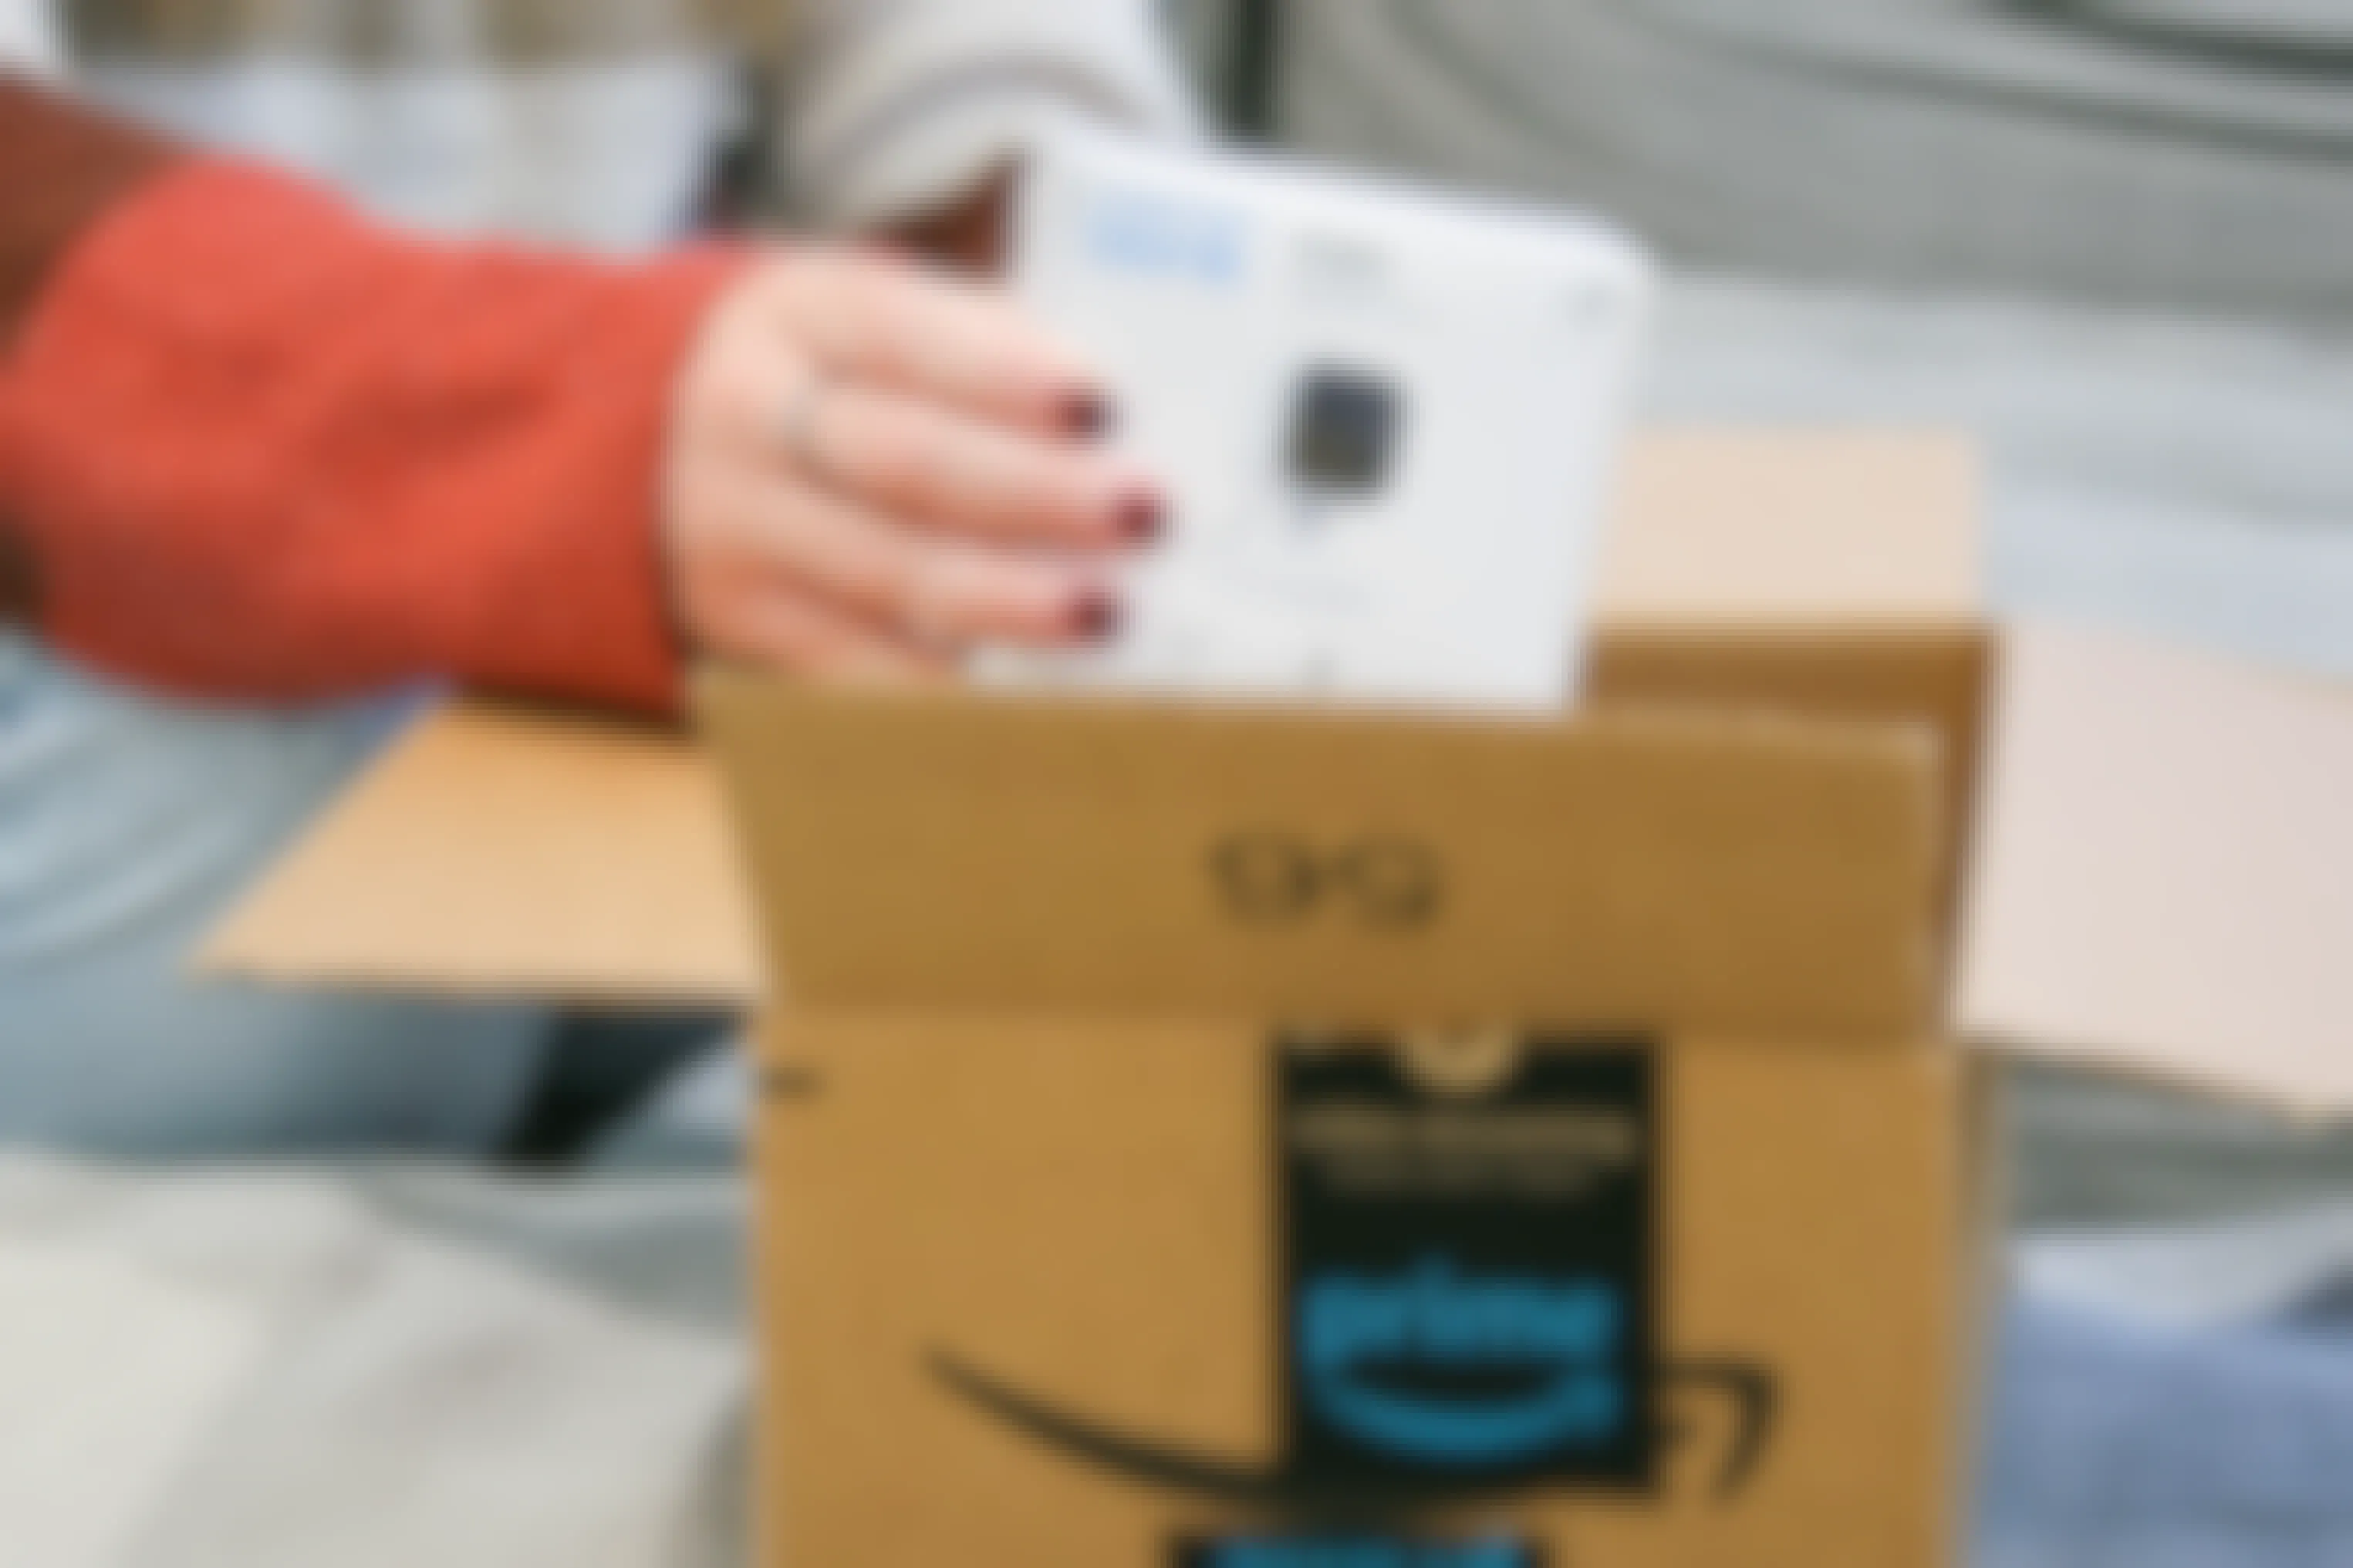 Amazon is Giving Free Blink Minis to Owners of the Amazon Cloud Cam